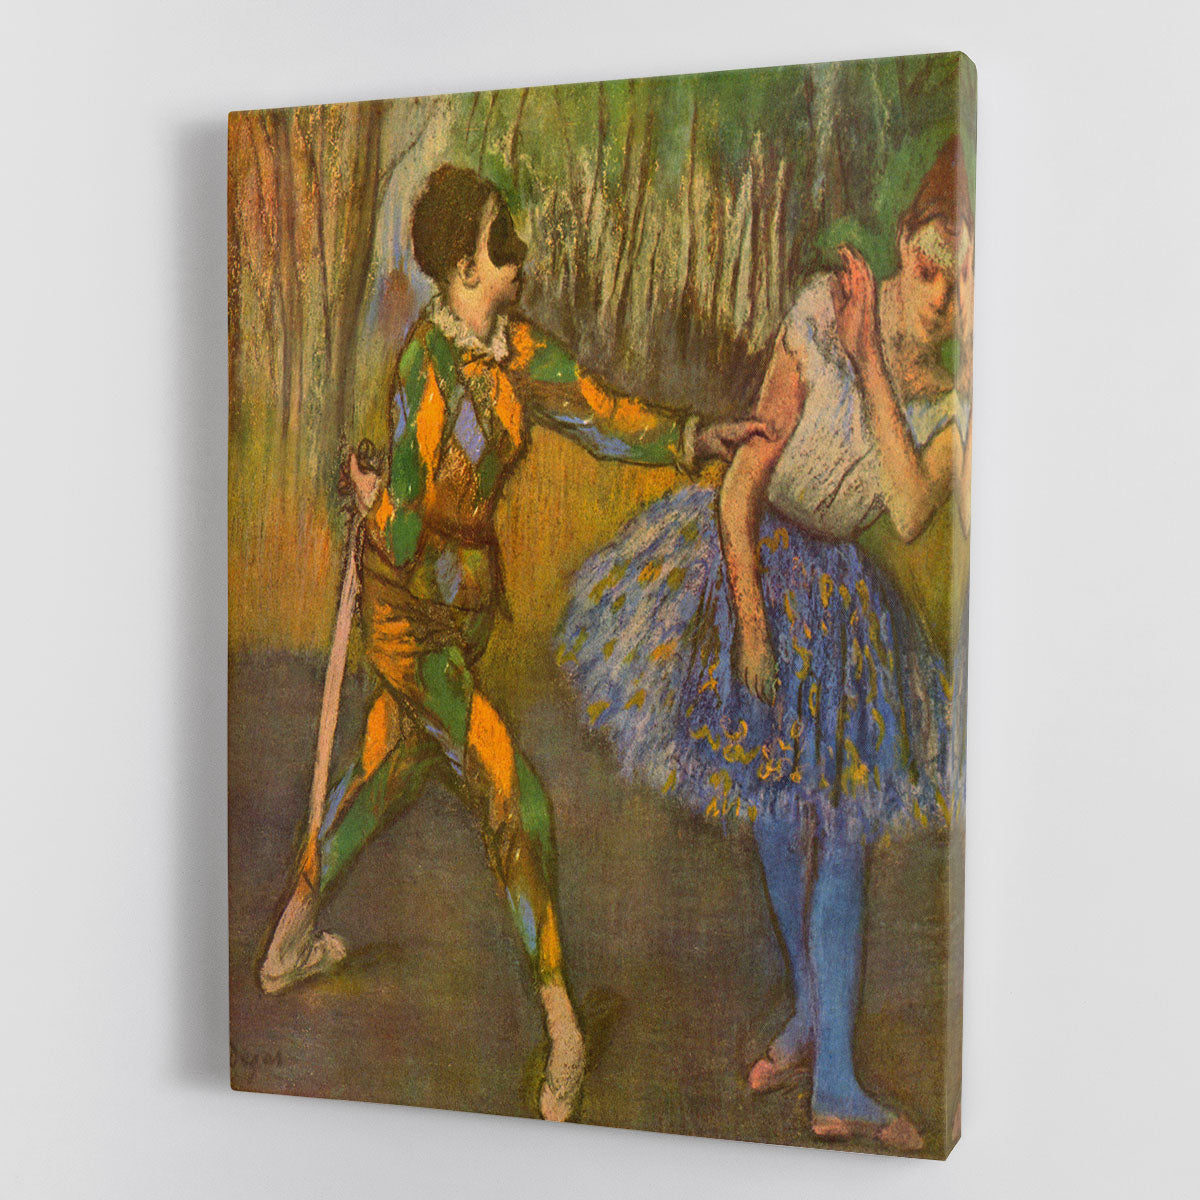 Harlequin and Columbine by Degas Canvas Print or Poster - Canvas Art Rocks - 1